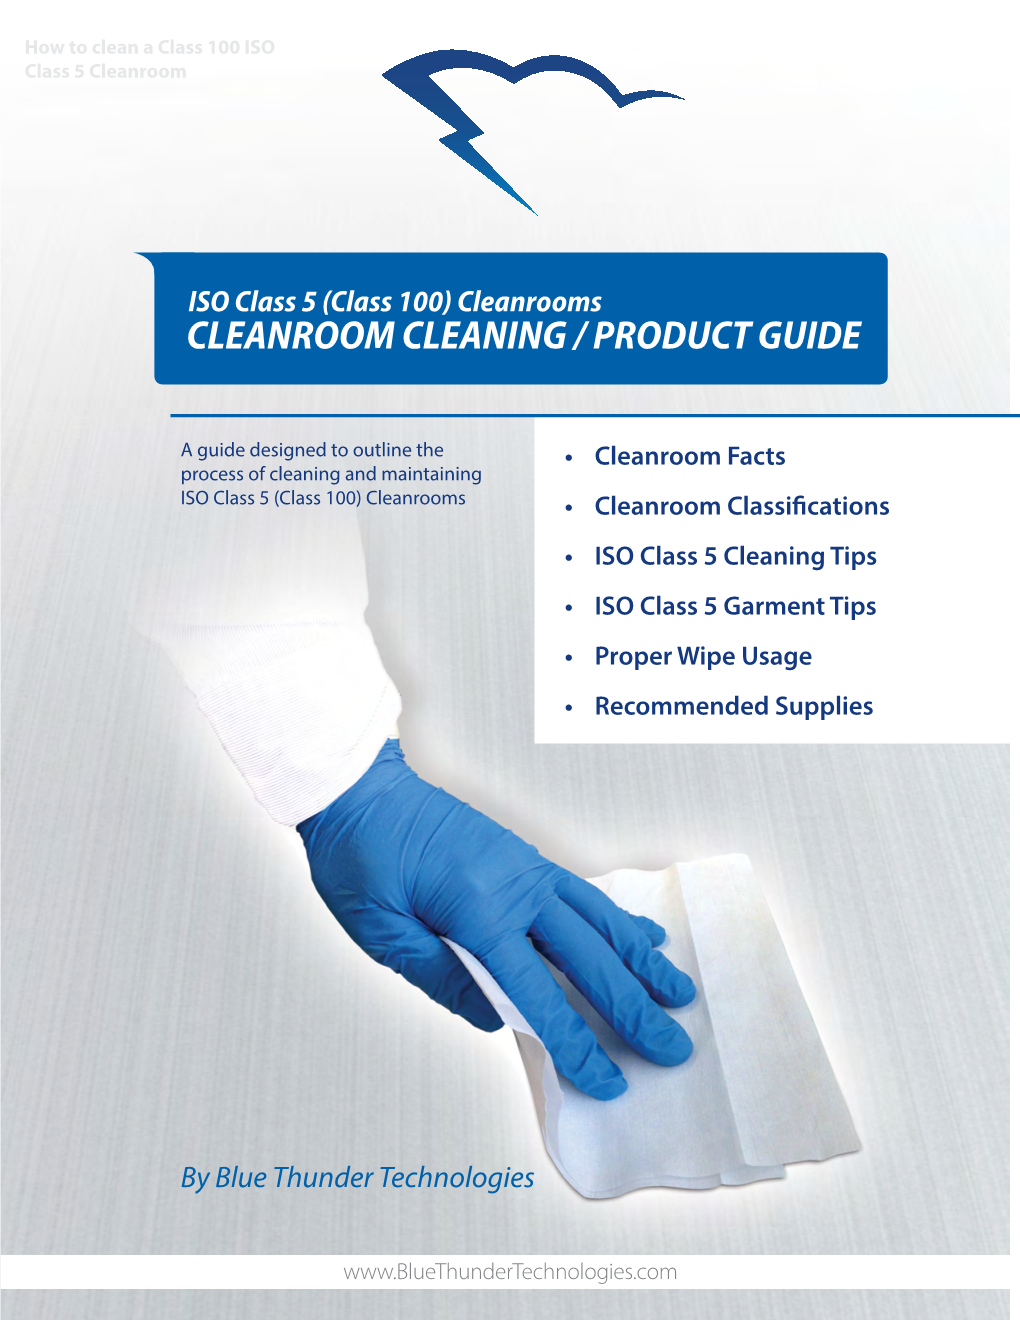 Cleanroom Cleaning / Product Guide